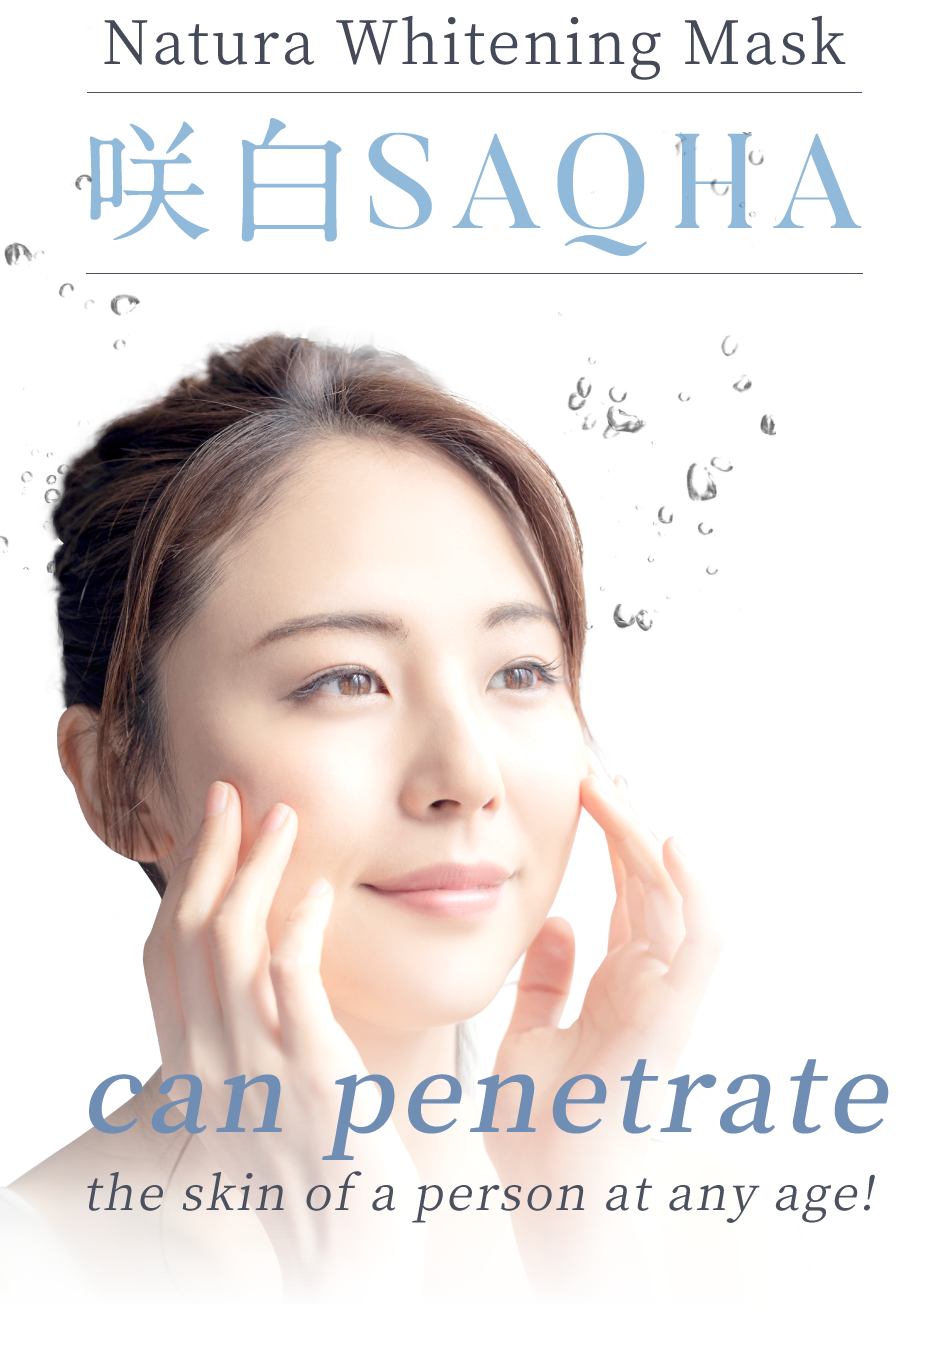 Natura Whitening Mask 咲白SAQHA can penetrate the skin of a person at any age!